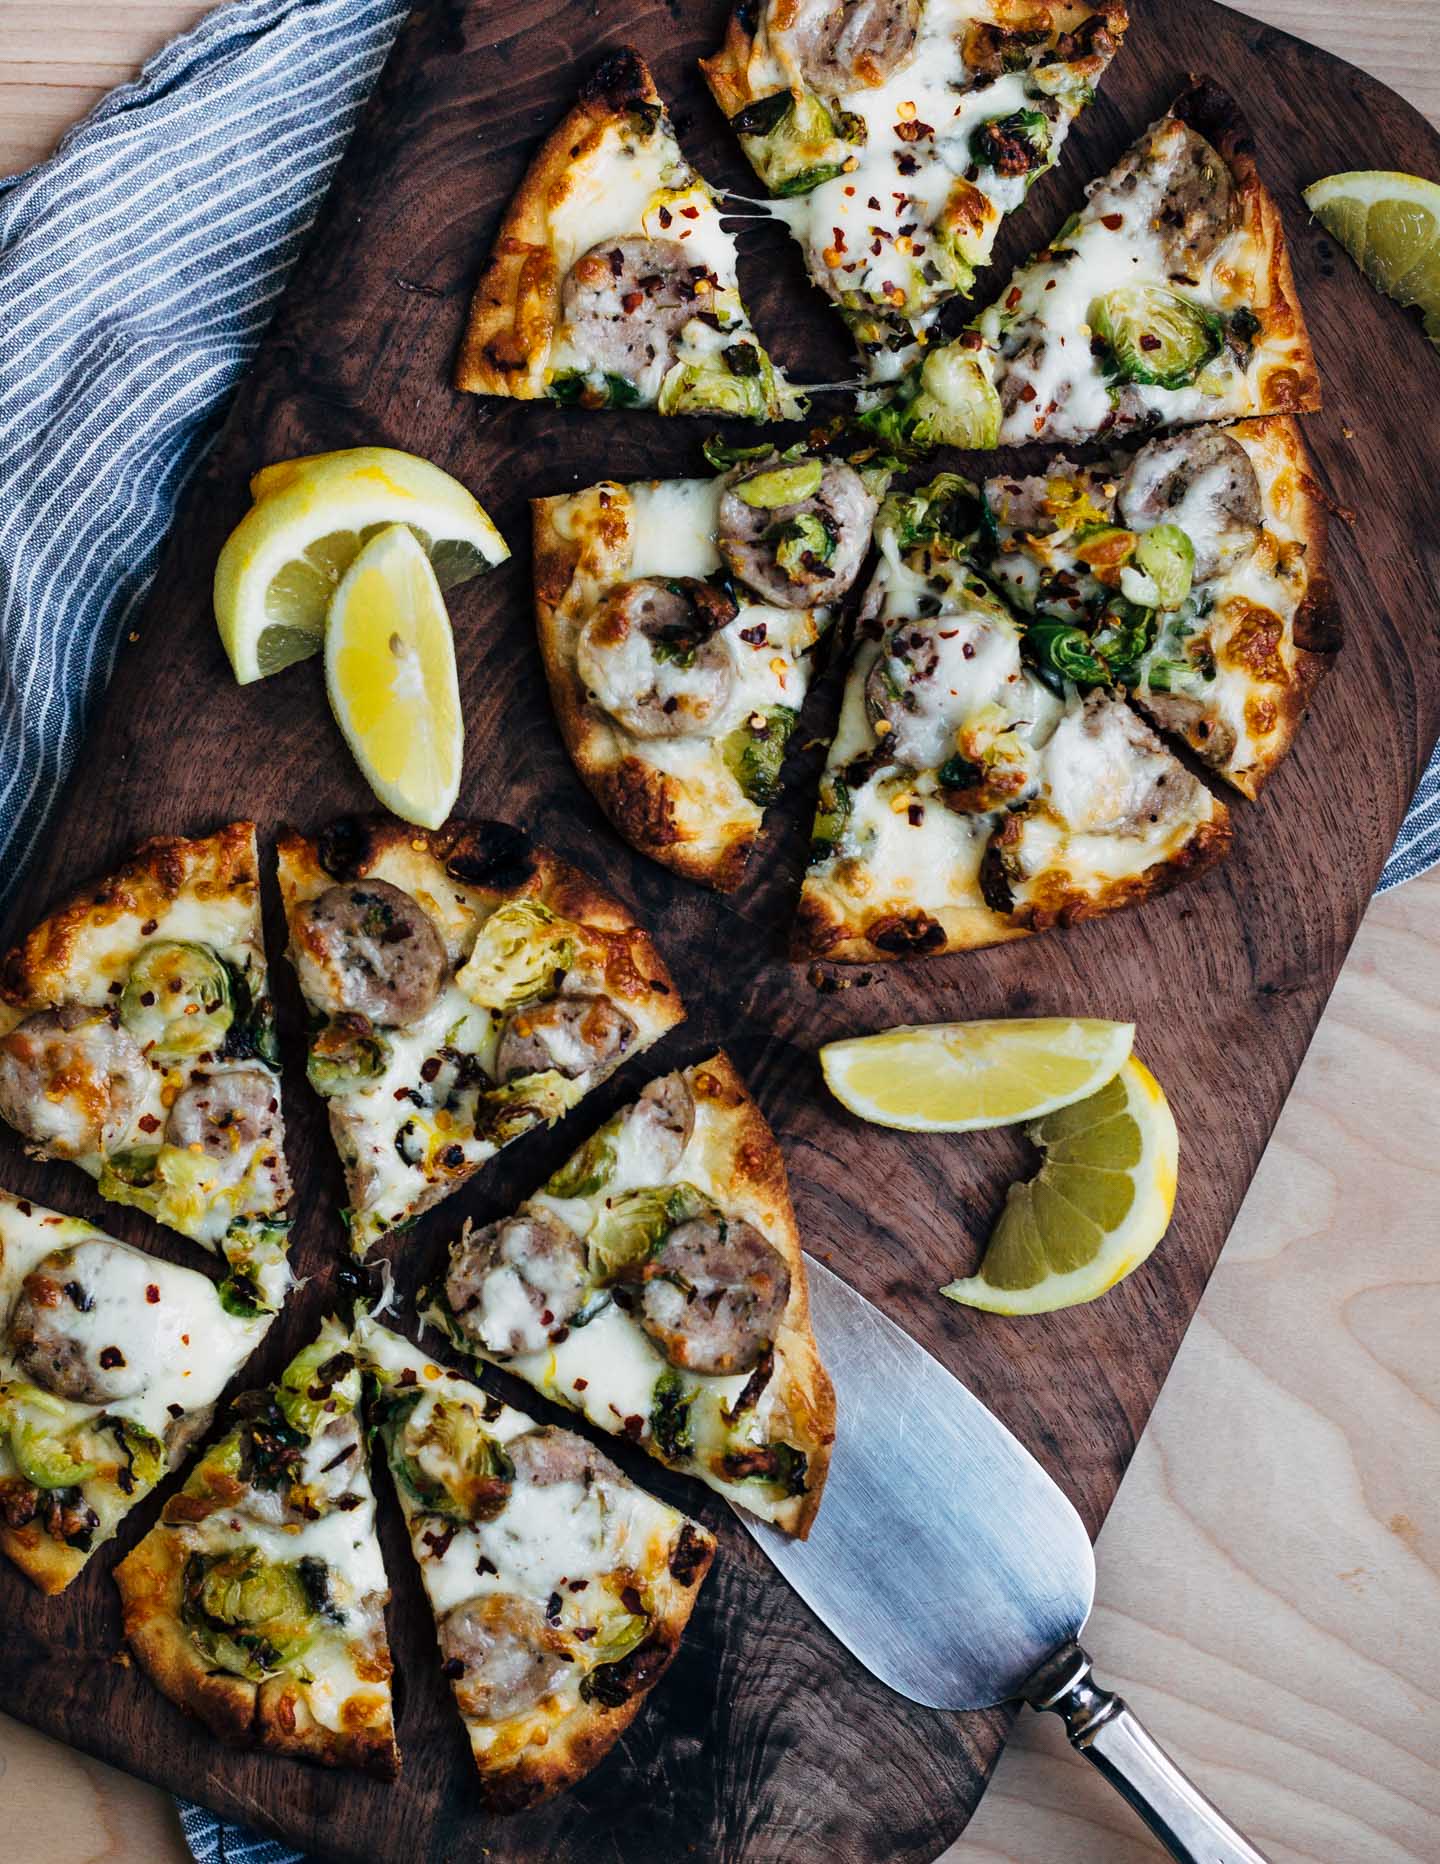 These sausage and Brussels sprout flatbread pizzas feature golden-edged roasted Brussels sprouts alongside tender sausage and melty mozzarella. Lemon zest and red pepper flakes punctuate the pizzas with brightness and heat, and lend a delightful complexity to this weeknight-friendly dish.